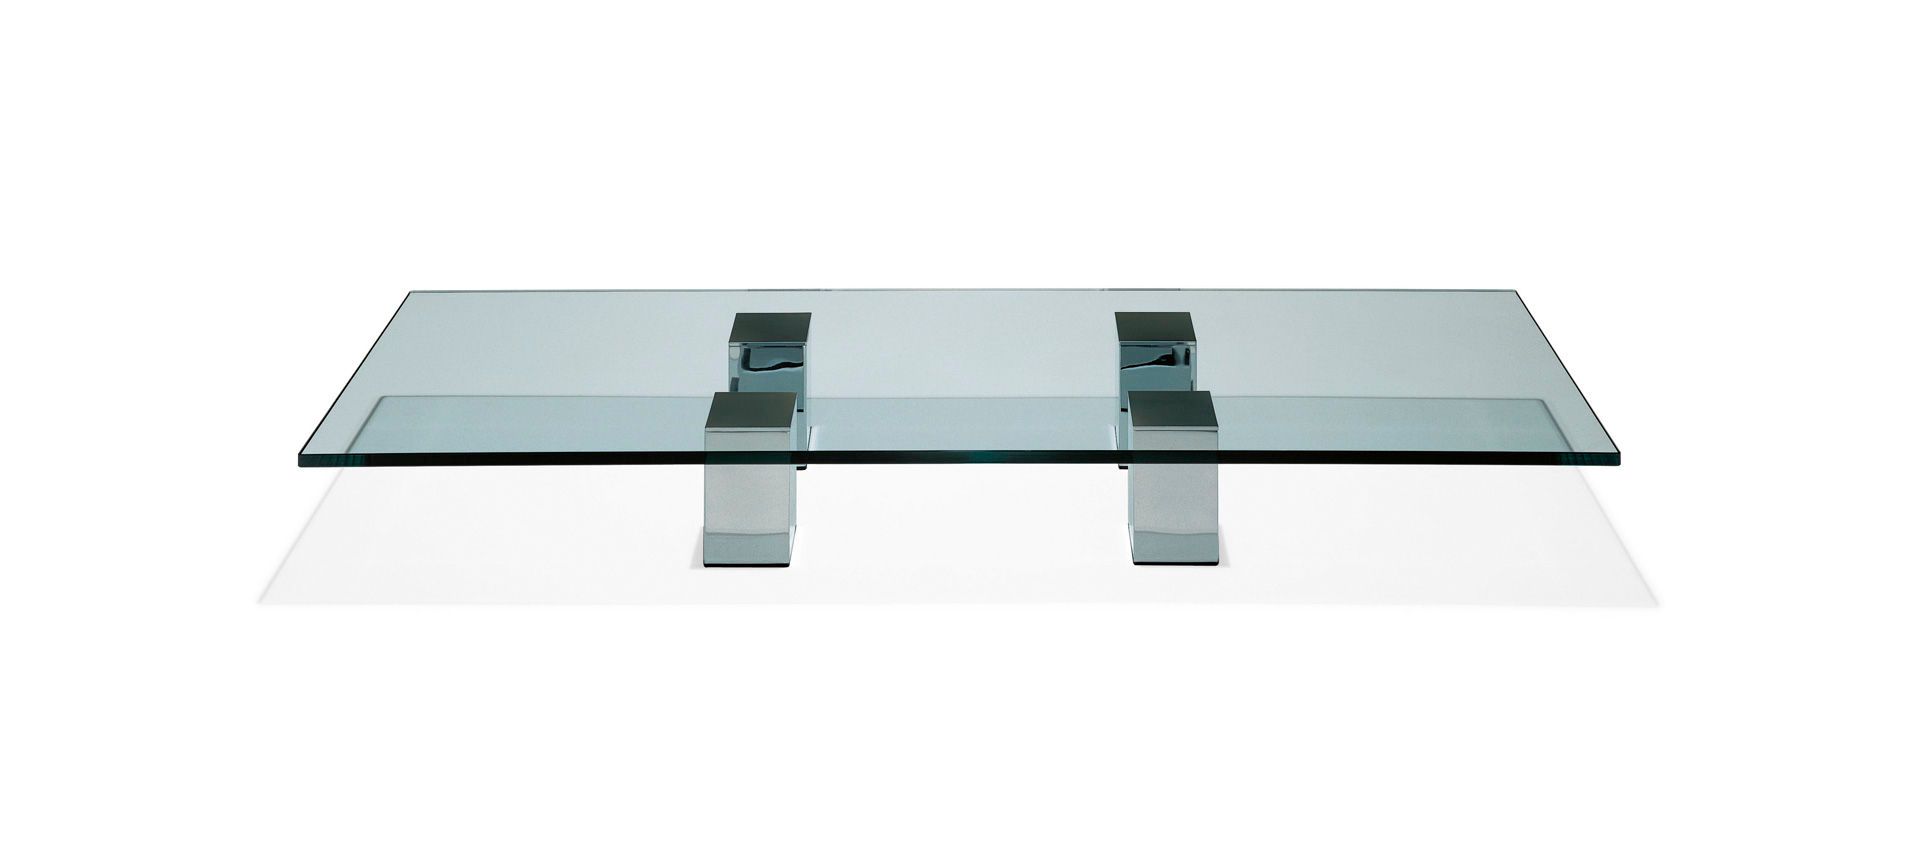 Glass Contemporary Coffee Tables Coffee Table Becomes The Supporting Furniture That Will Make Your Room Greater Rare Vintage Retro 60s A Younger (View 2 of 10)